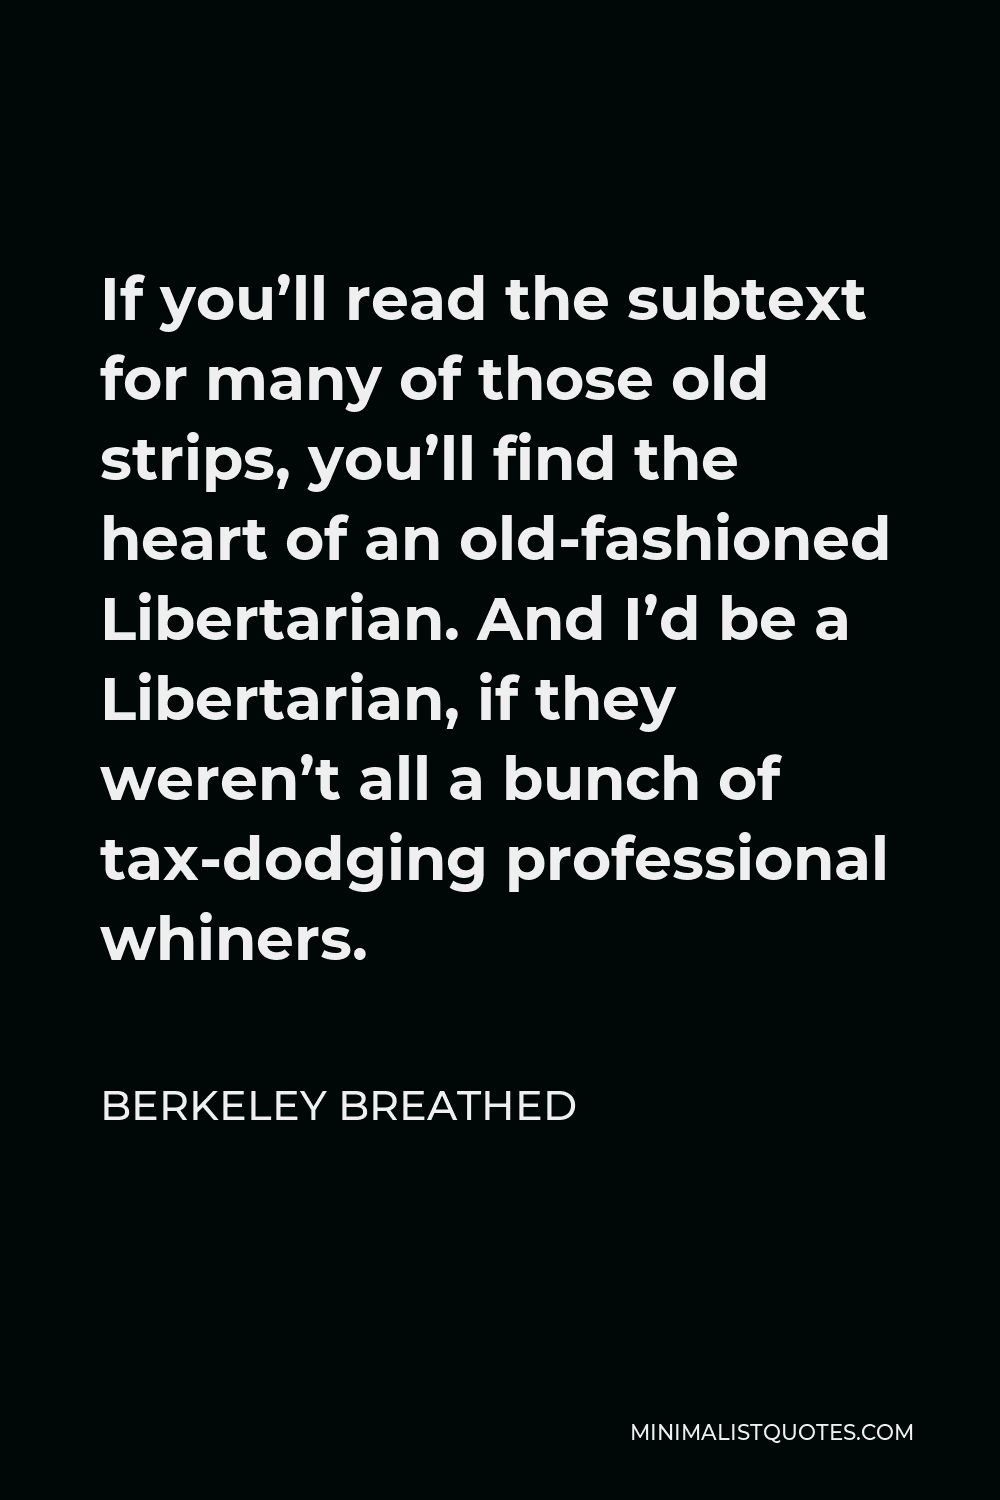 Berkeley Breathed Quote - If you’ll read the subtext for many of those old strips, you’ll find the heart of an old-fashioned Libertarian. And I’d be a Libertarian, if they weren’t all a bunch of tax-dodging professional whiners.